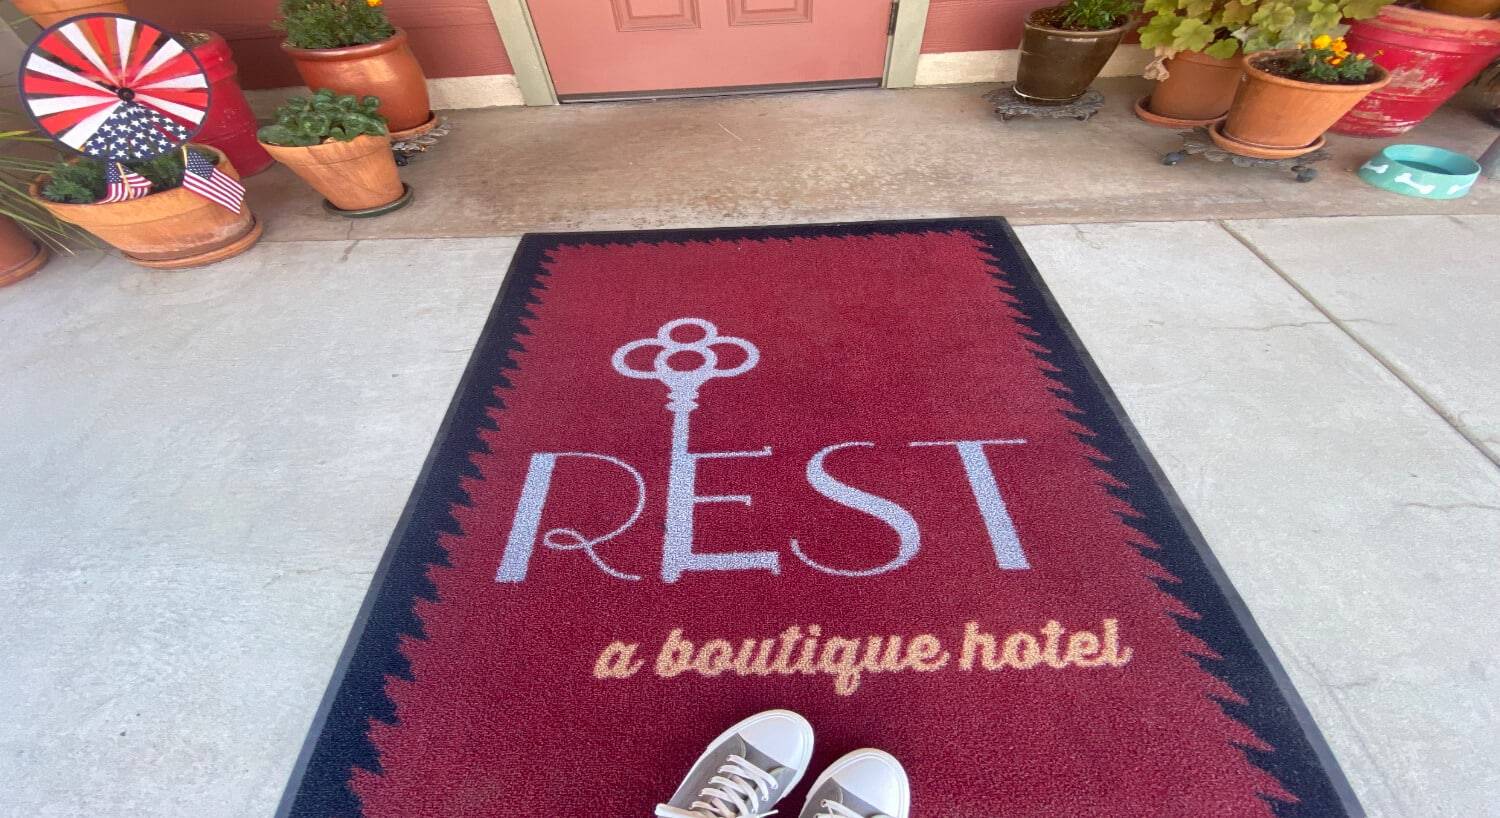 a red carpet that says Rest a boutique hotel with a key in the E and a tennis shoes at the bottom, with part of a door and flower pots on either side